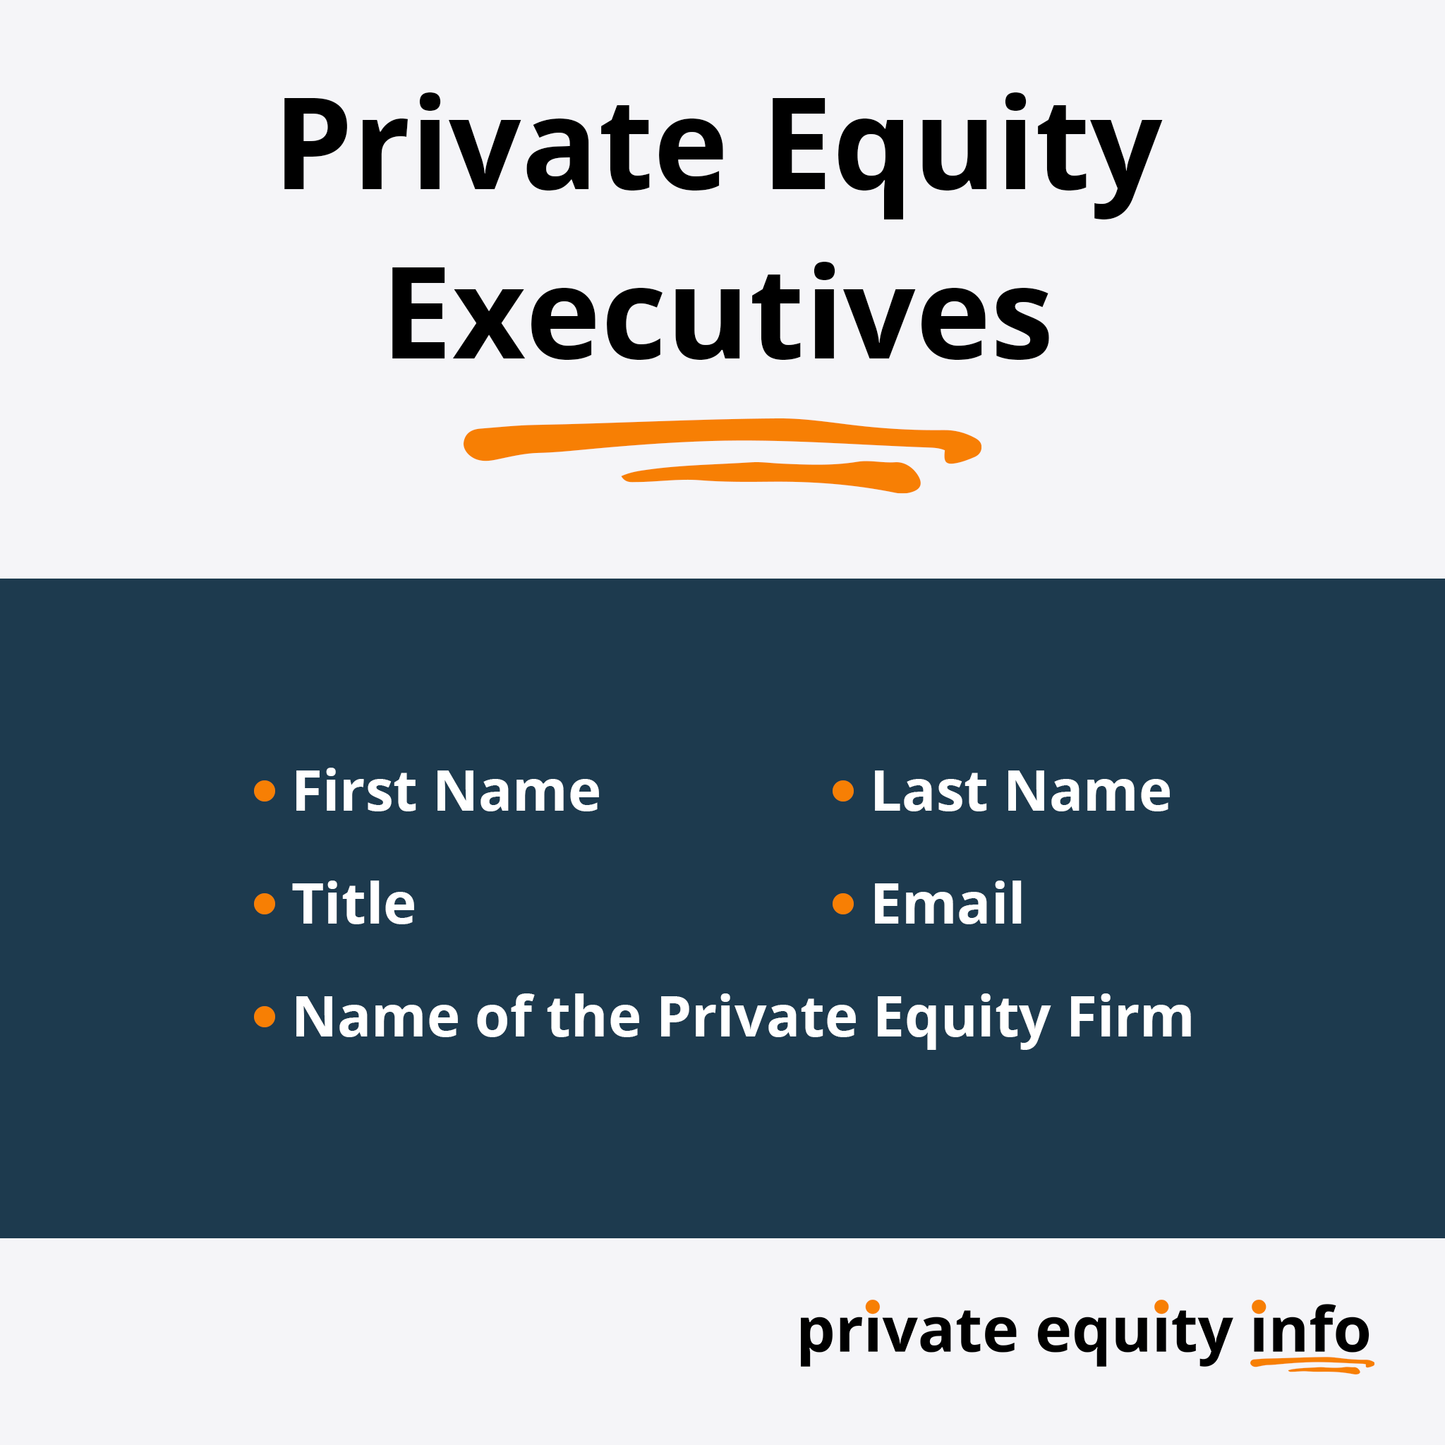 Private Equity Firms in Pennsylvania